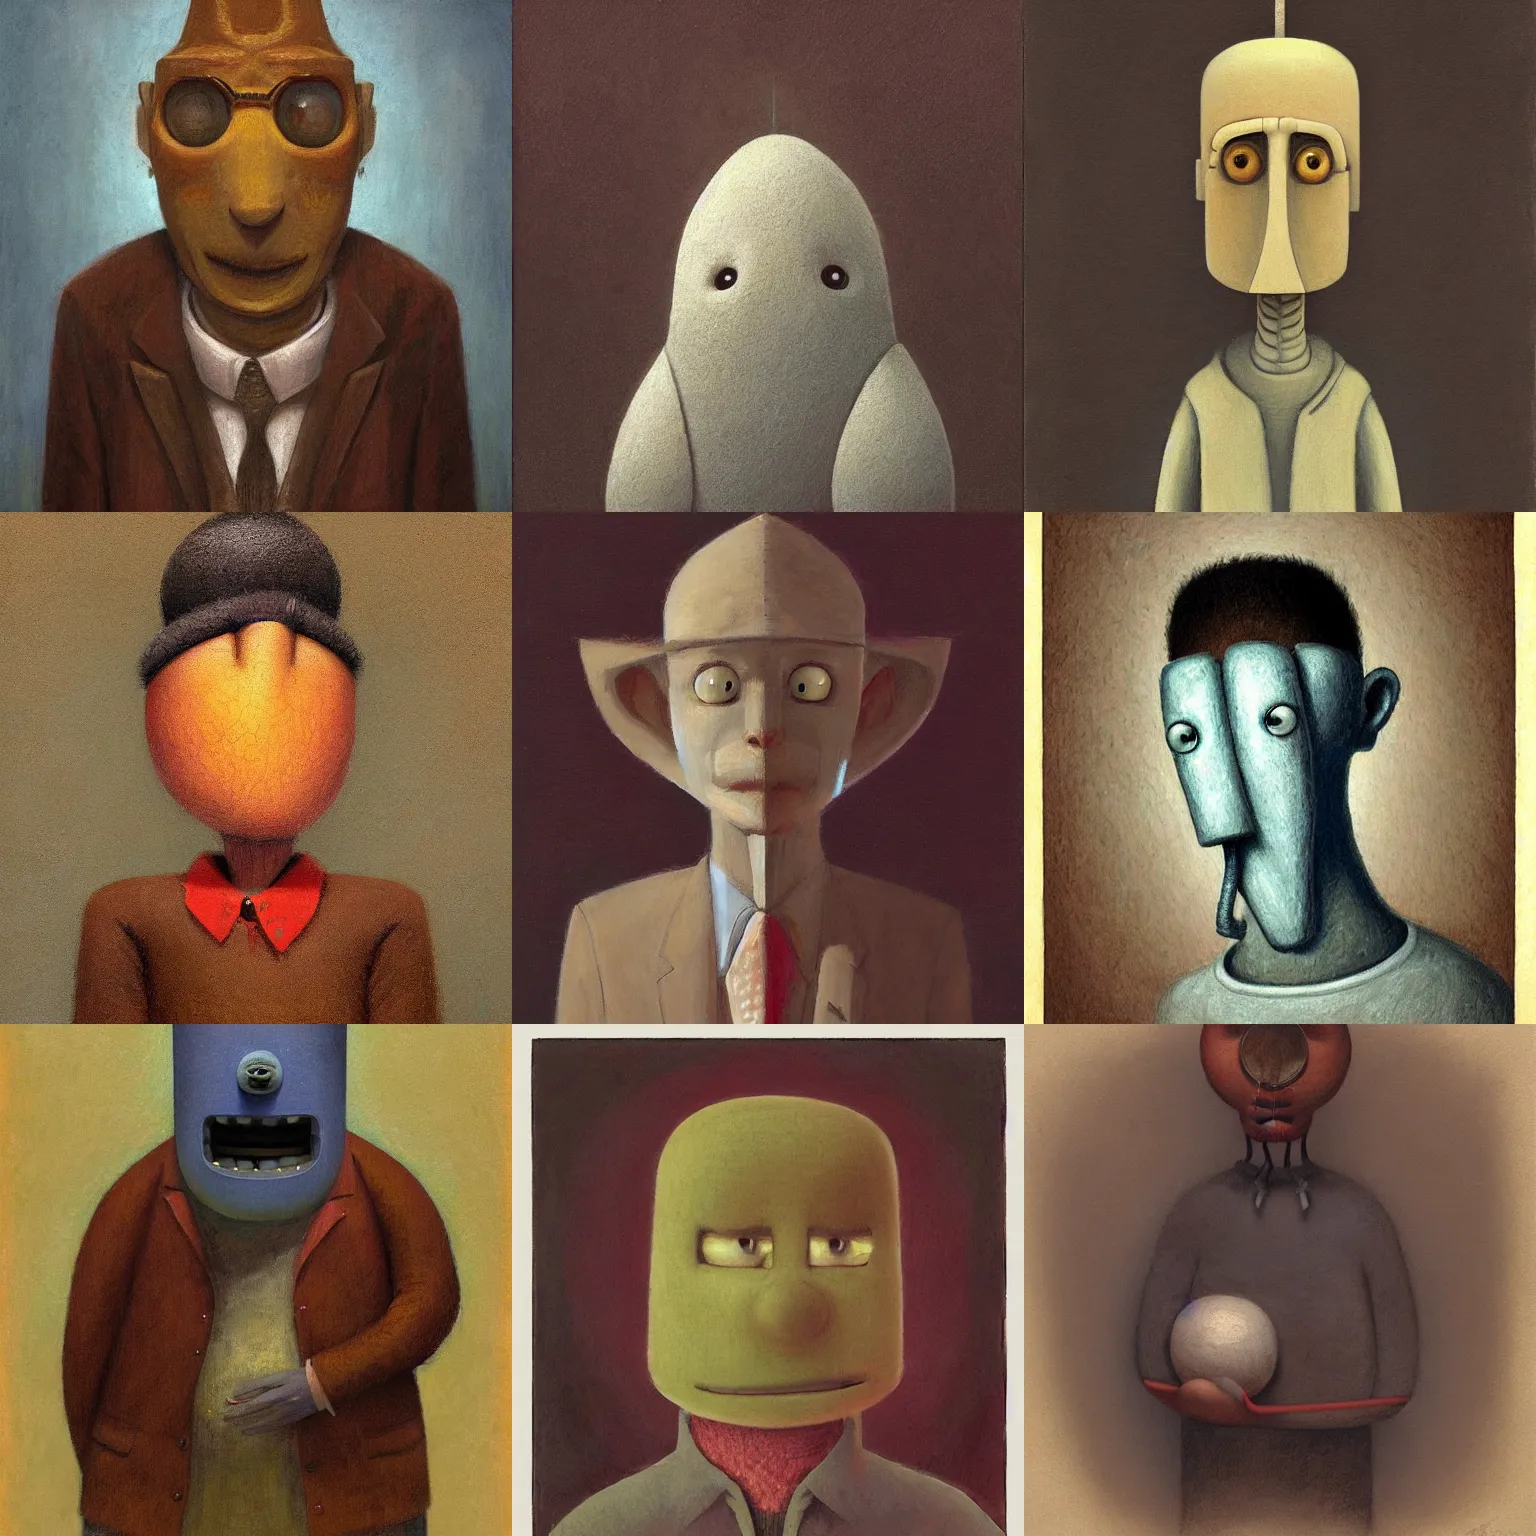 Prompt: a portrait of a chad character by shaun tan